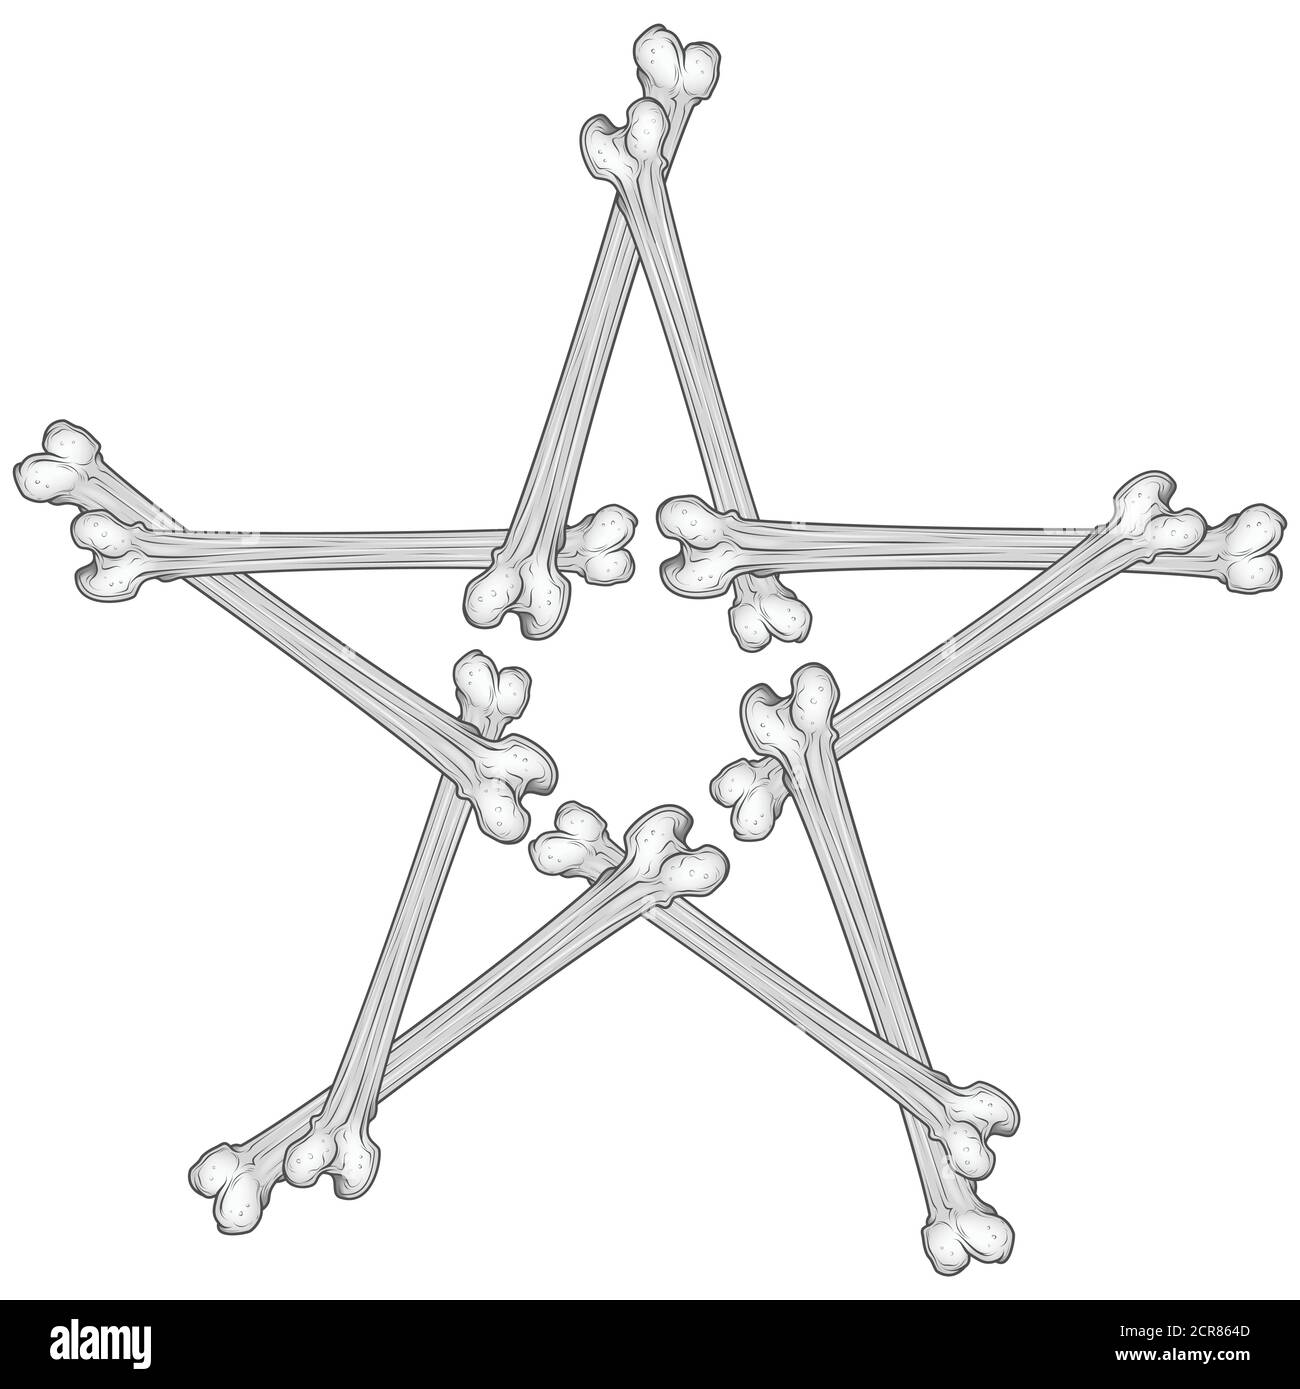 Vector illustration of five pointed star made of bones, all on white background. Stock Vector